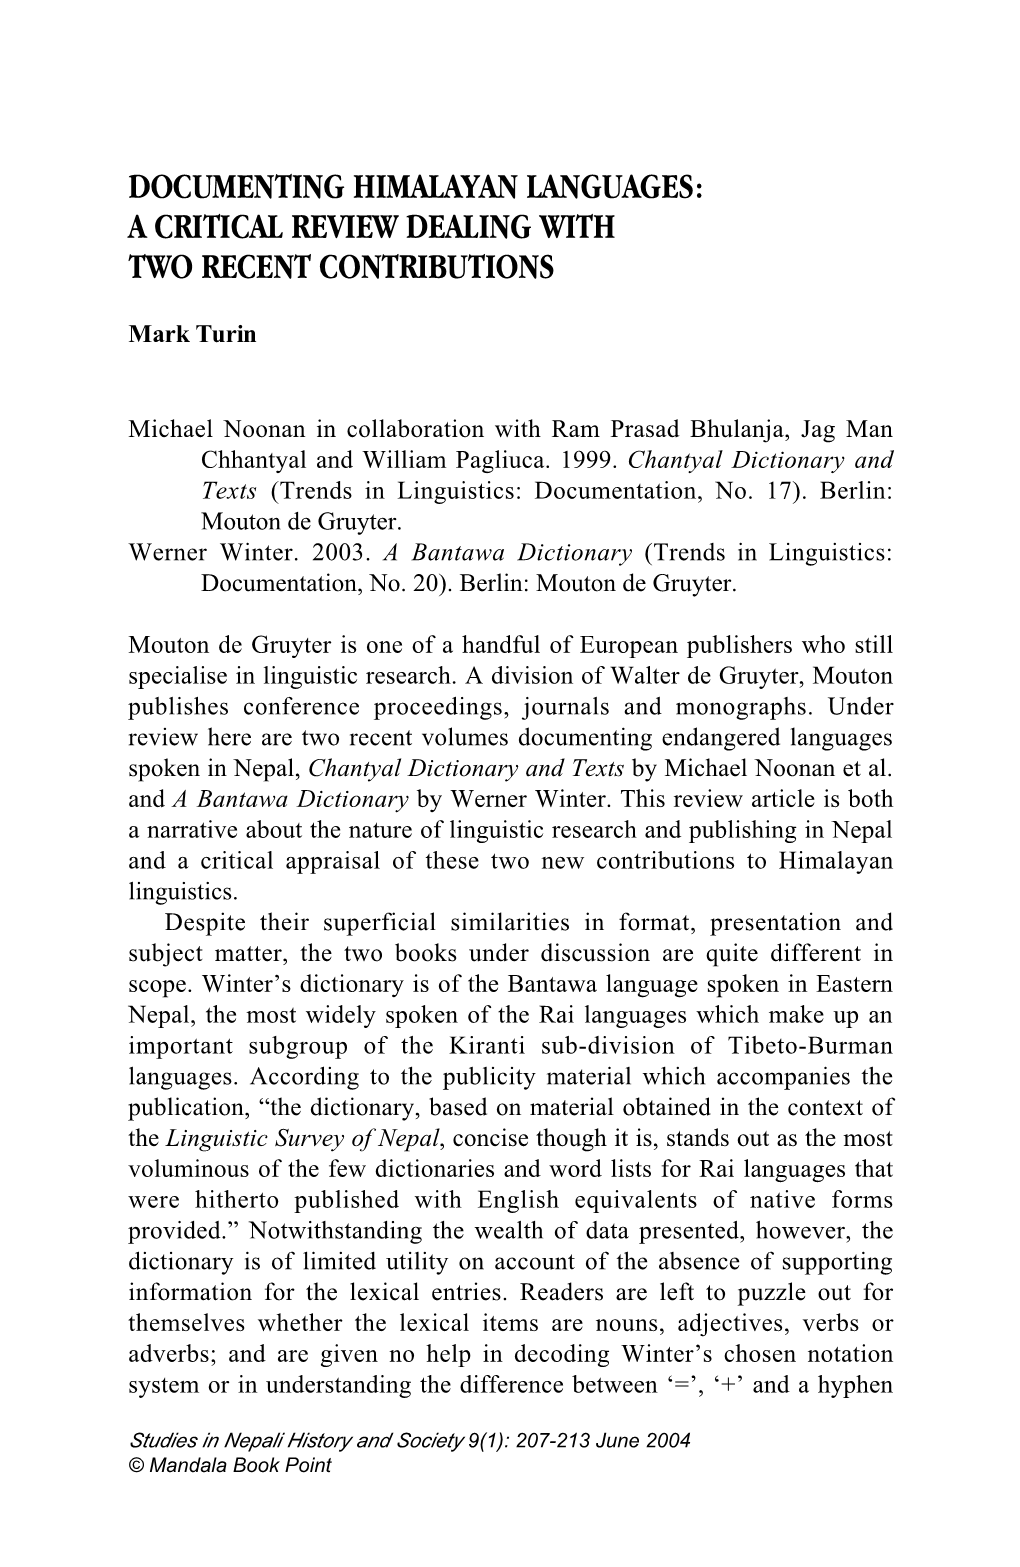 Documenting Himalayan Languages: a Critical Review Dealing with Two Recent Contributions